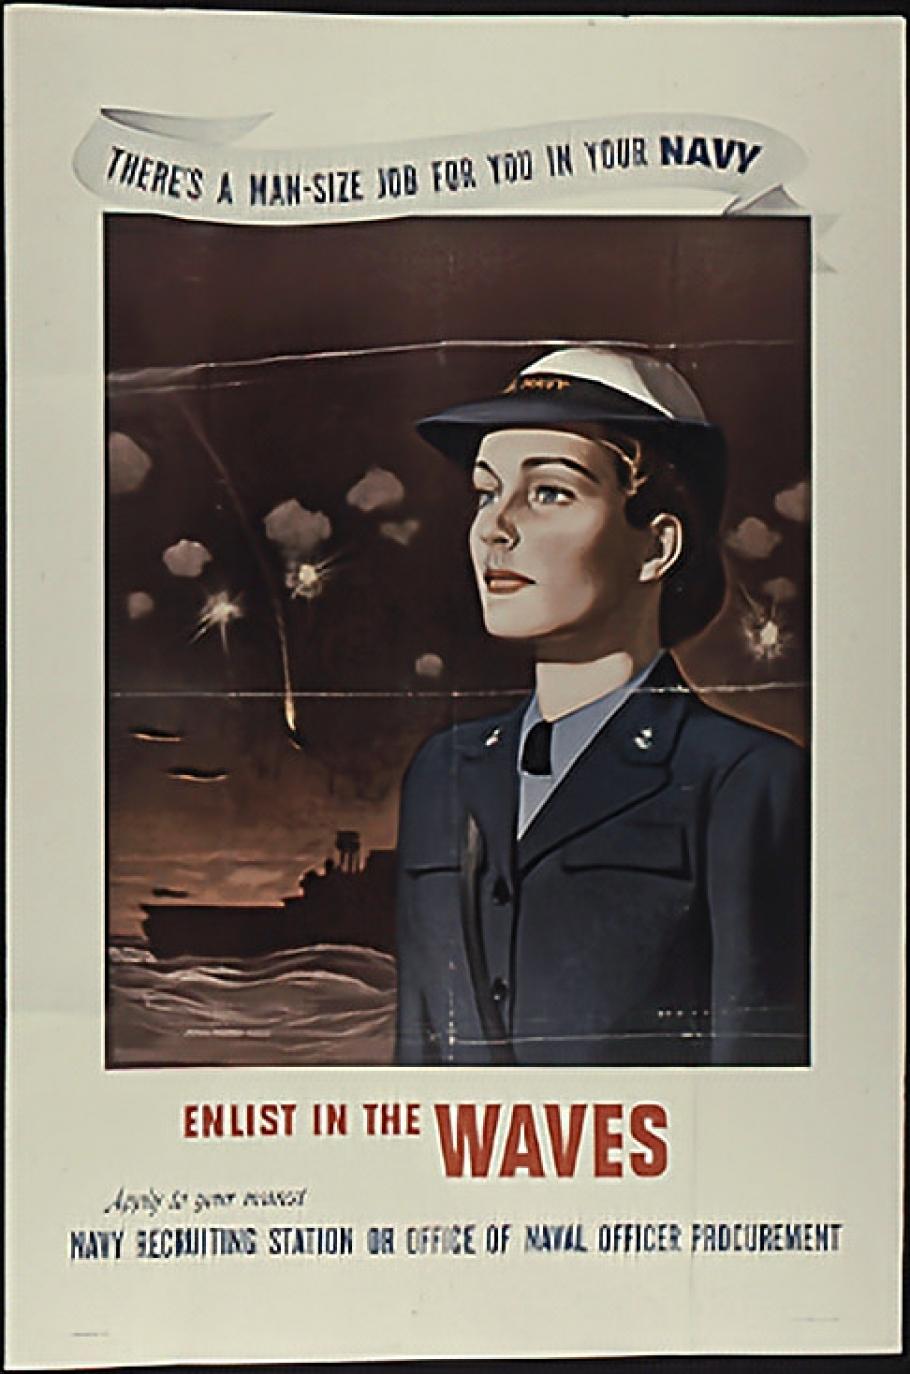 U.S. Navy poster that reads "there's a man-size job for you in your Navy"